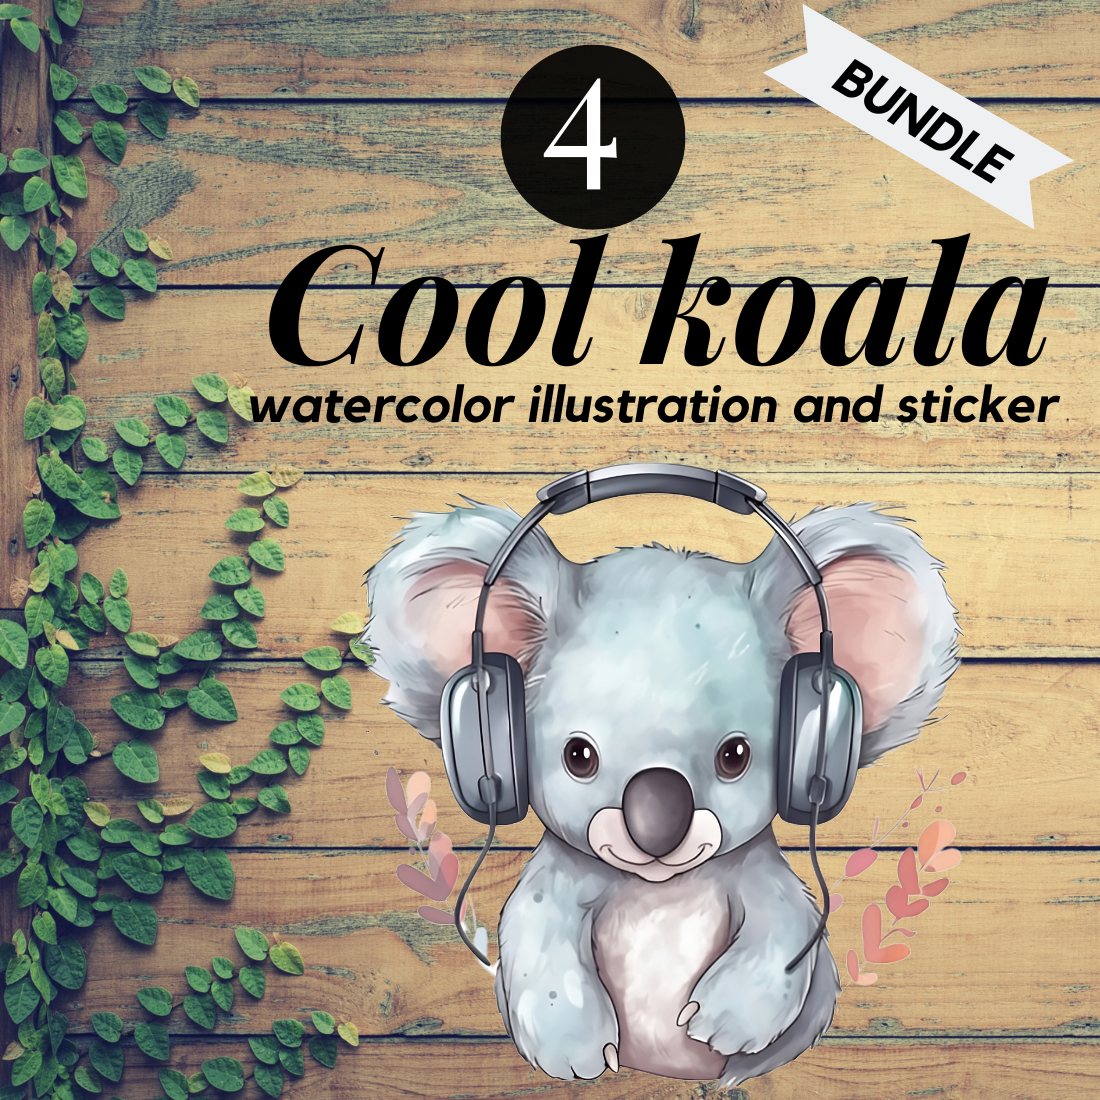 "Koalas in Watercolor: A Collection of Cute and Cool Stickers and Illustrations" cover image.